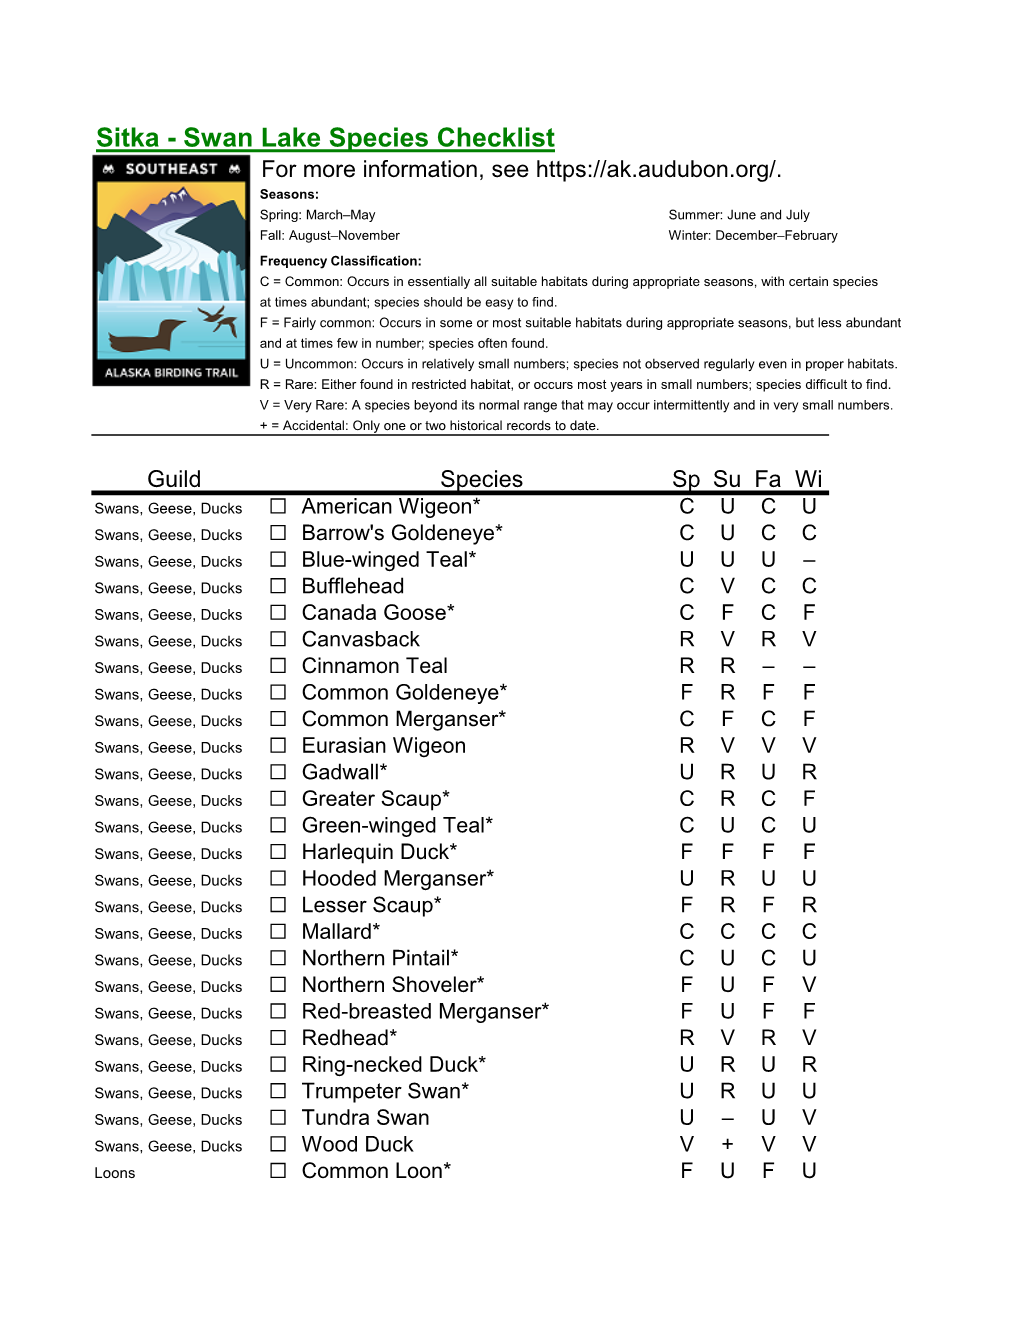 Sitka - Swan Lake Species Checklist for More Information, See